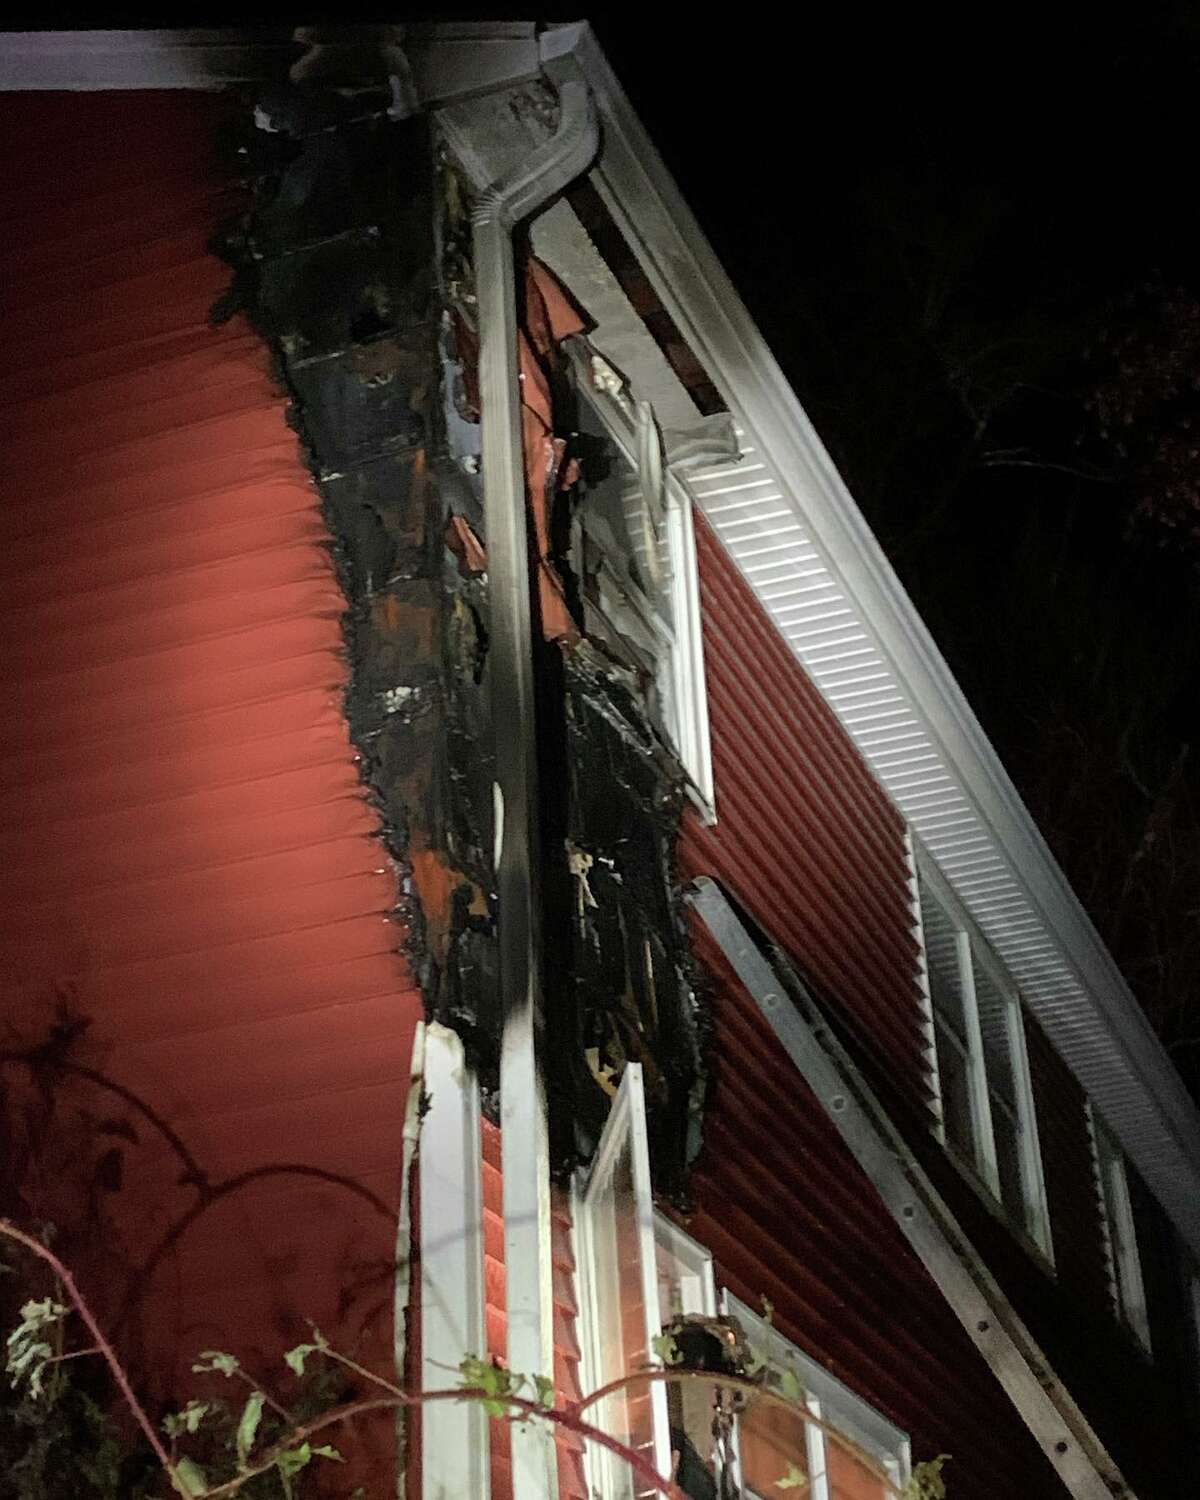 All five Newtown fire companies were called to the scene of a structure fire at a single-family home on Ferris Road Wednesday night.